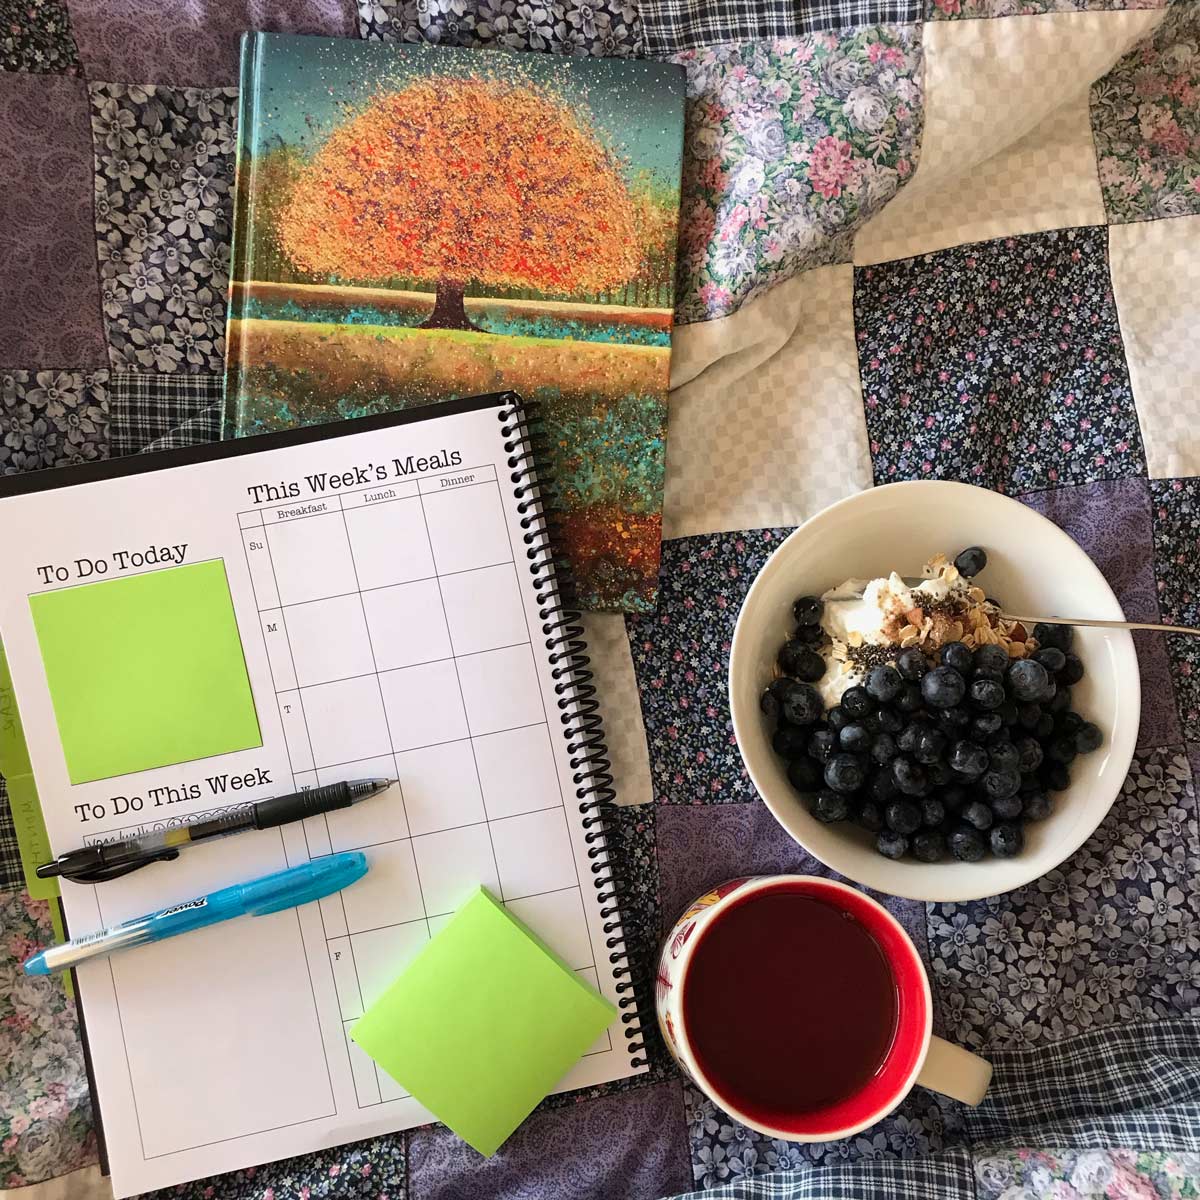 planner and calendar with bowl of yogurt and berries on bed.